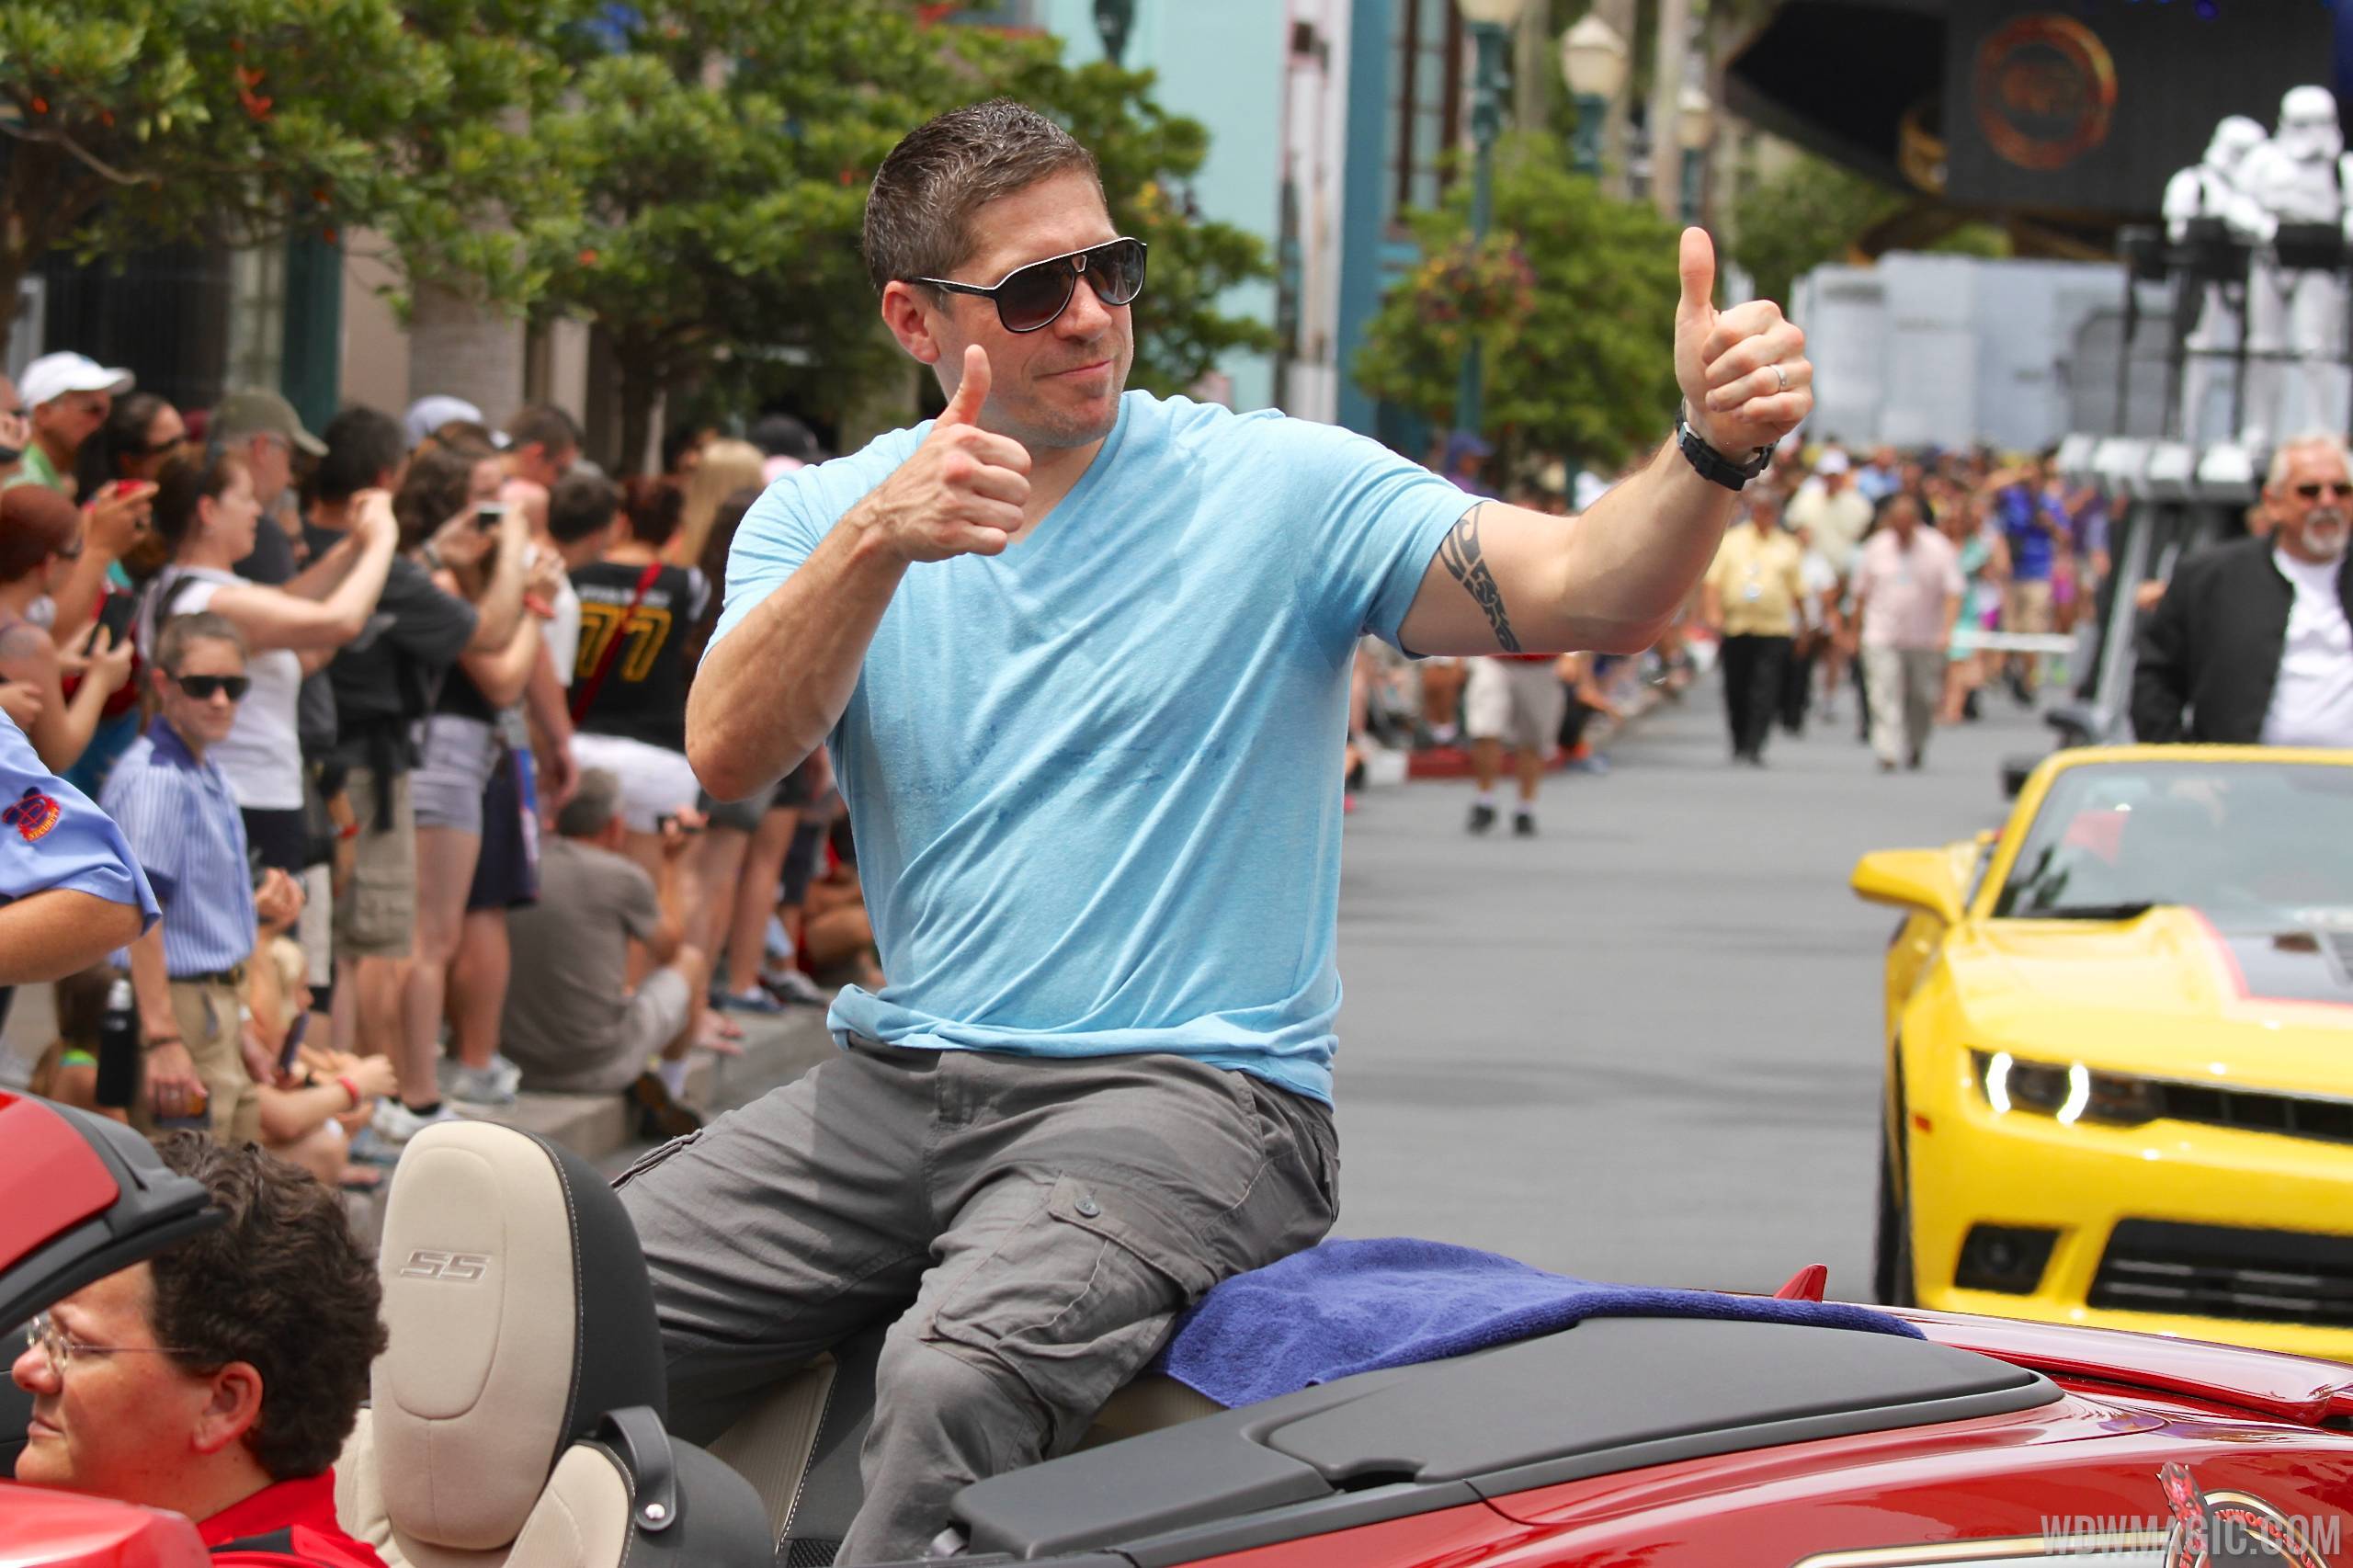 PHOTOS - 2014 Star Wars Weekends 3 Legends of the Force Motorcade celebrity guests